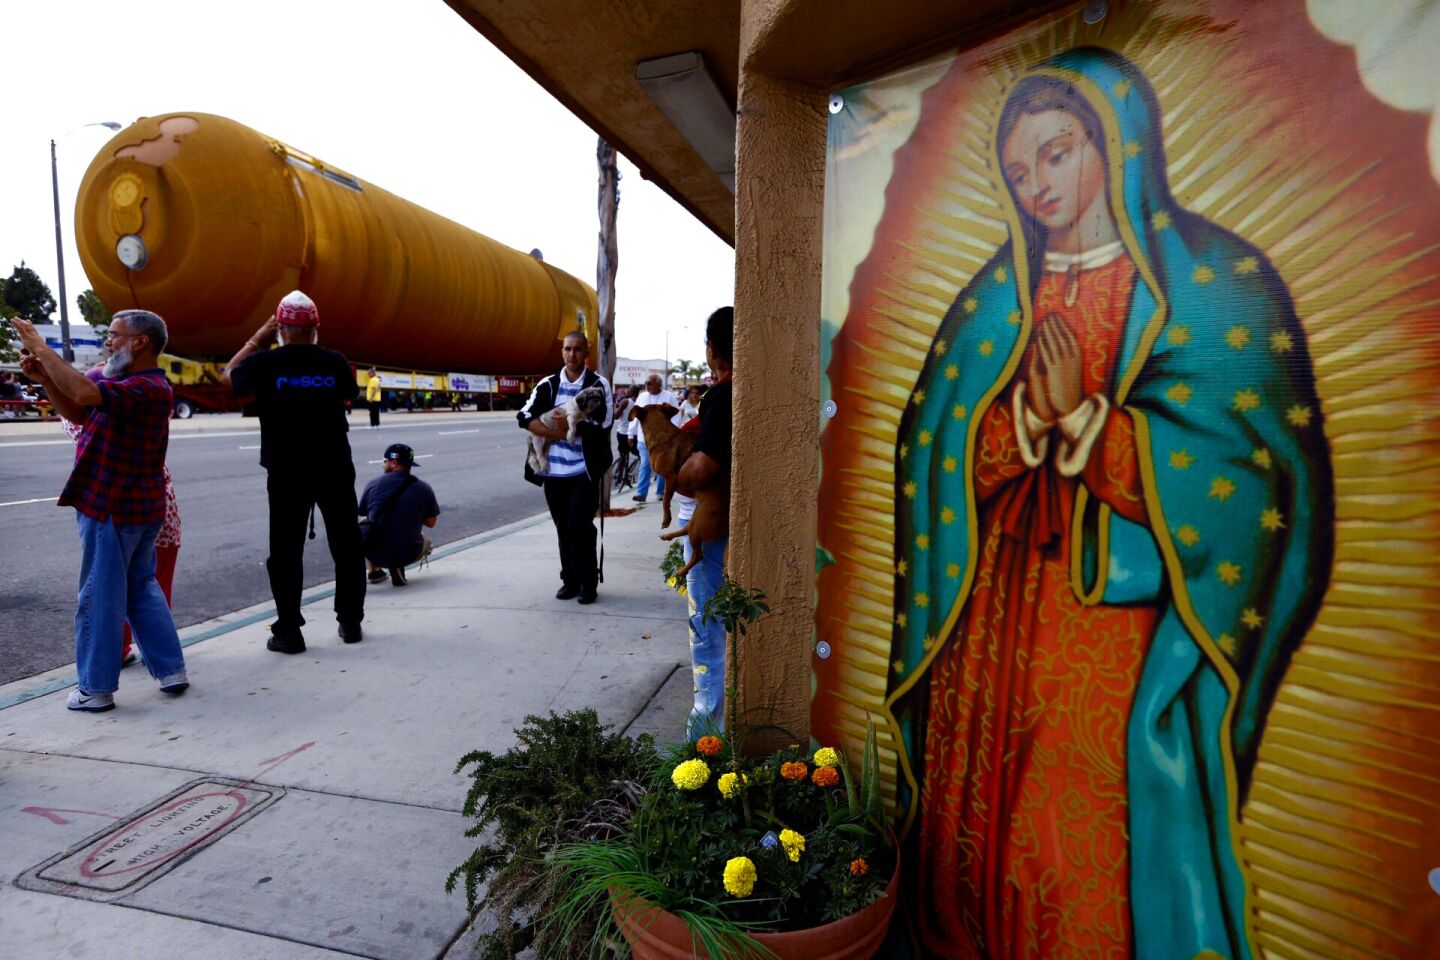 The space shuttle fuel tank moves past a mural of the Virgin of Guadalupe on La Brea Avenue in Inglewood.